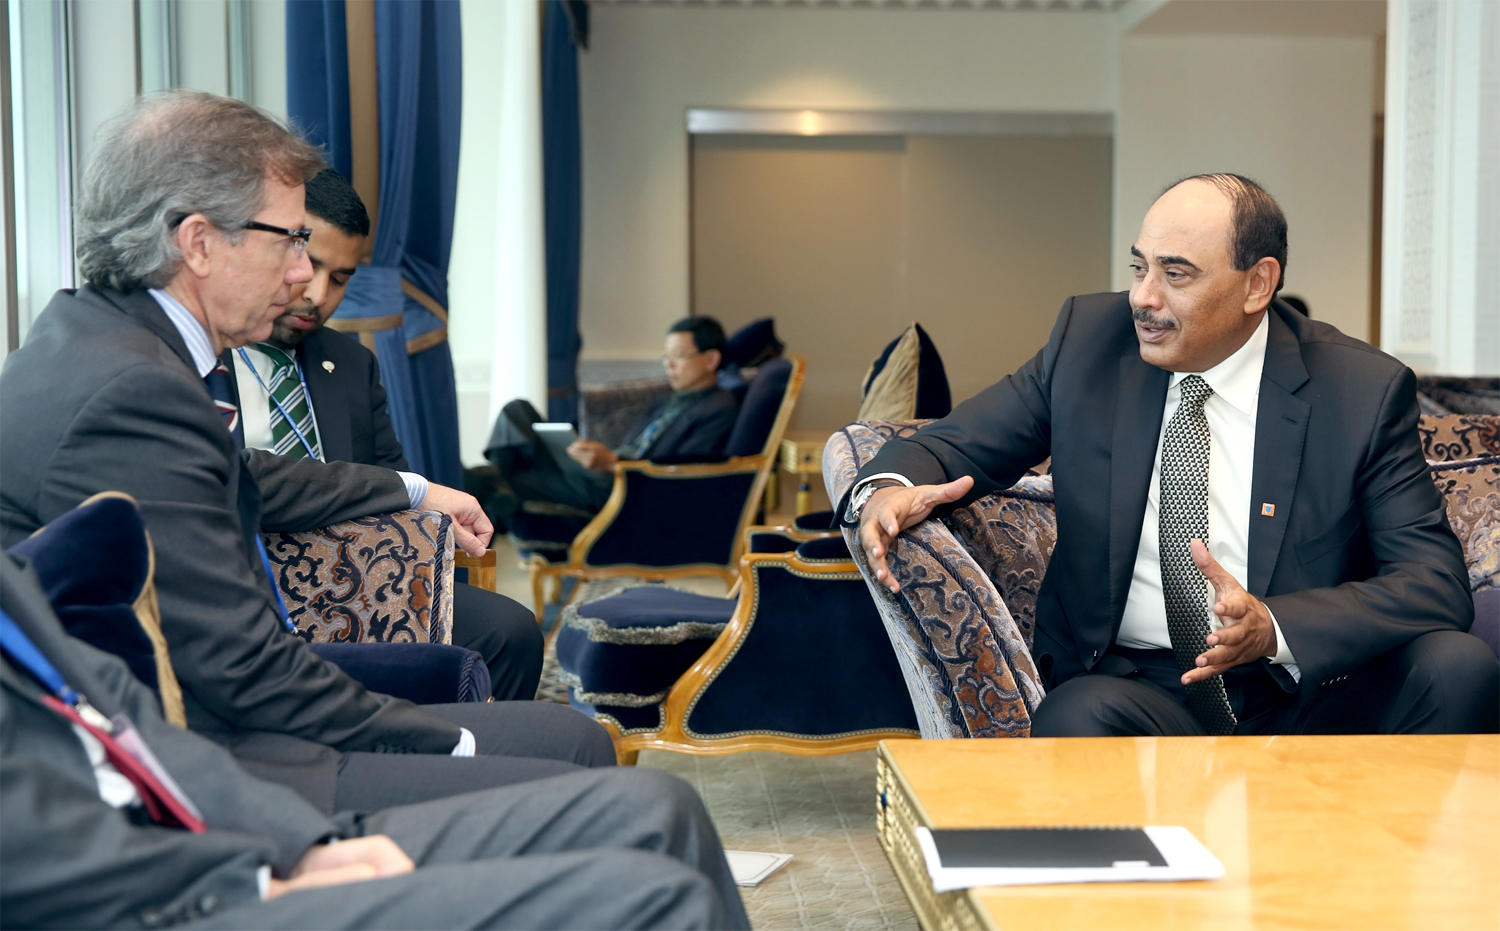 First Deputy Prime Minister and Minister of Foreign Affairs Sheikh Sabah Al-Khaled Al-Hamad Al-Sabah and Special Representative of the Secretary-General and Head of the United Nations Support Mission in Libya (UNSMIL) Bernardino Leon